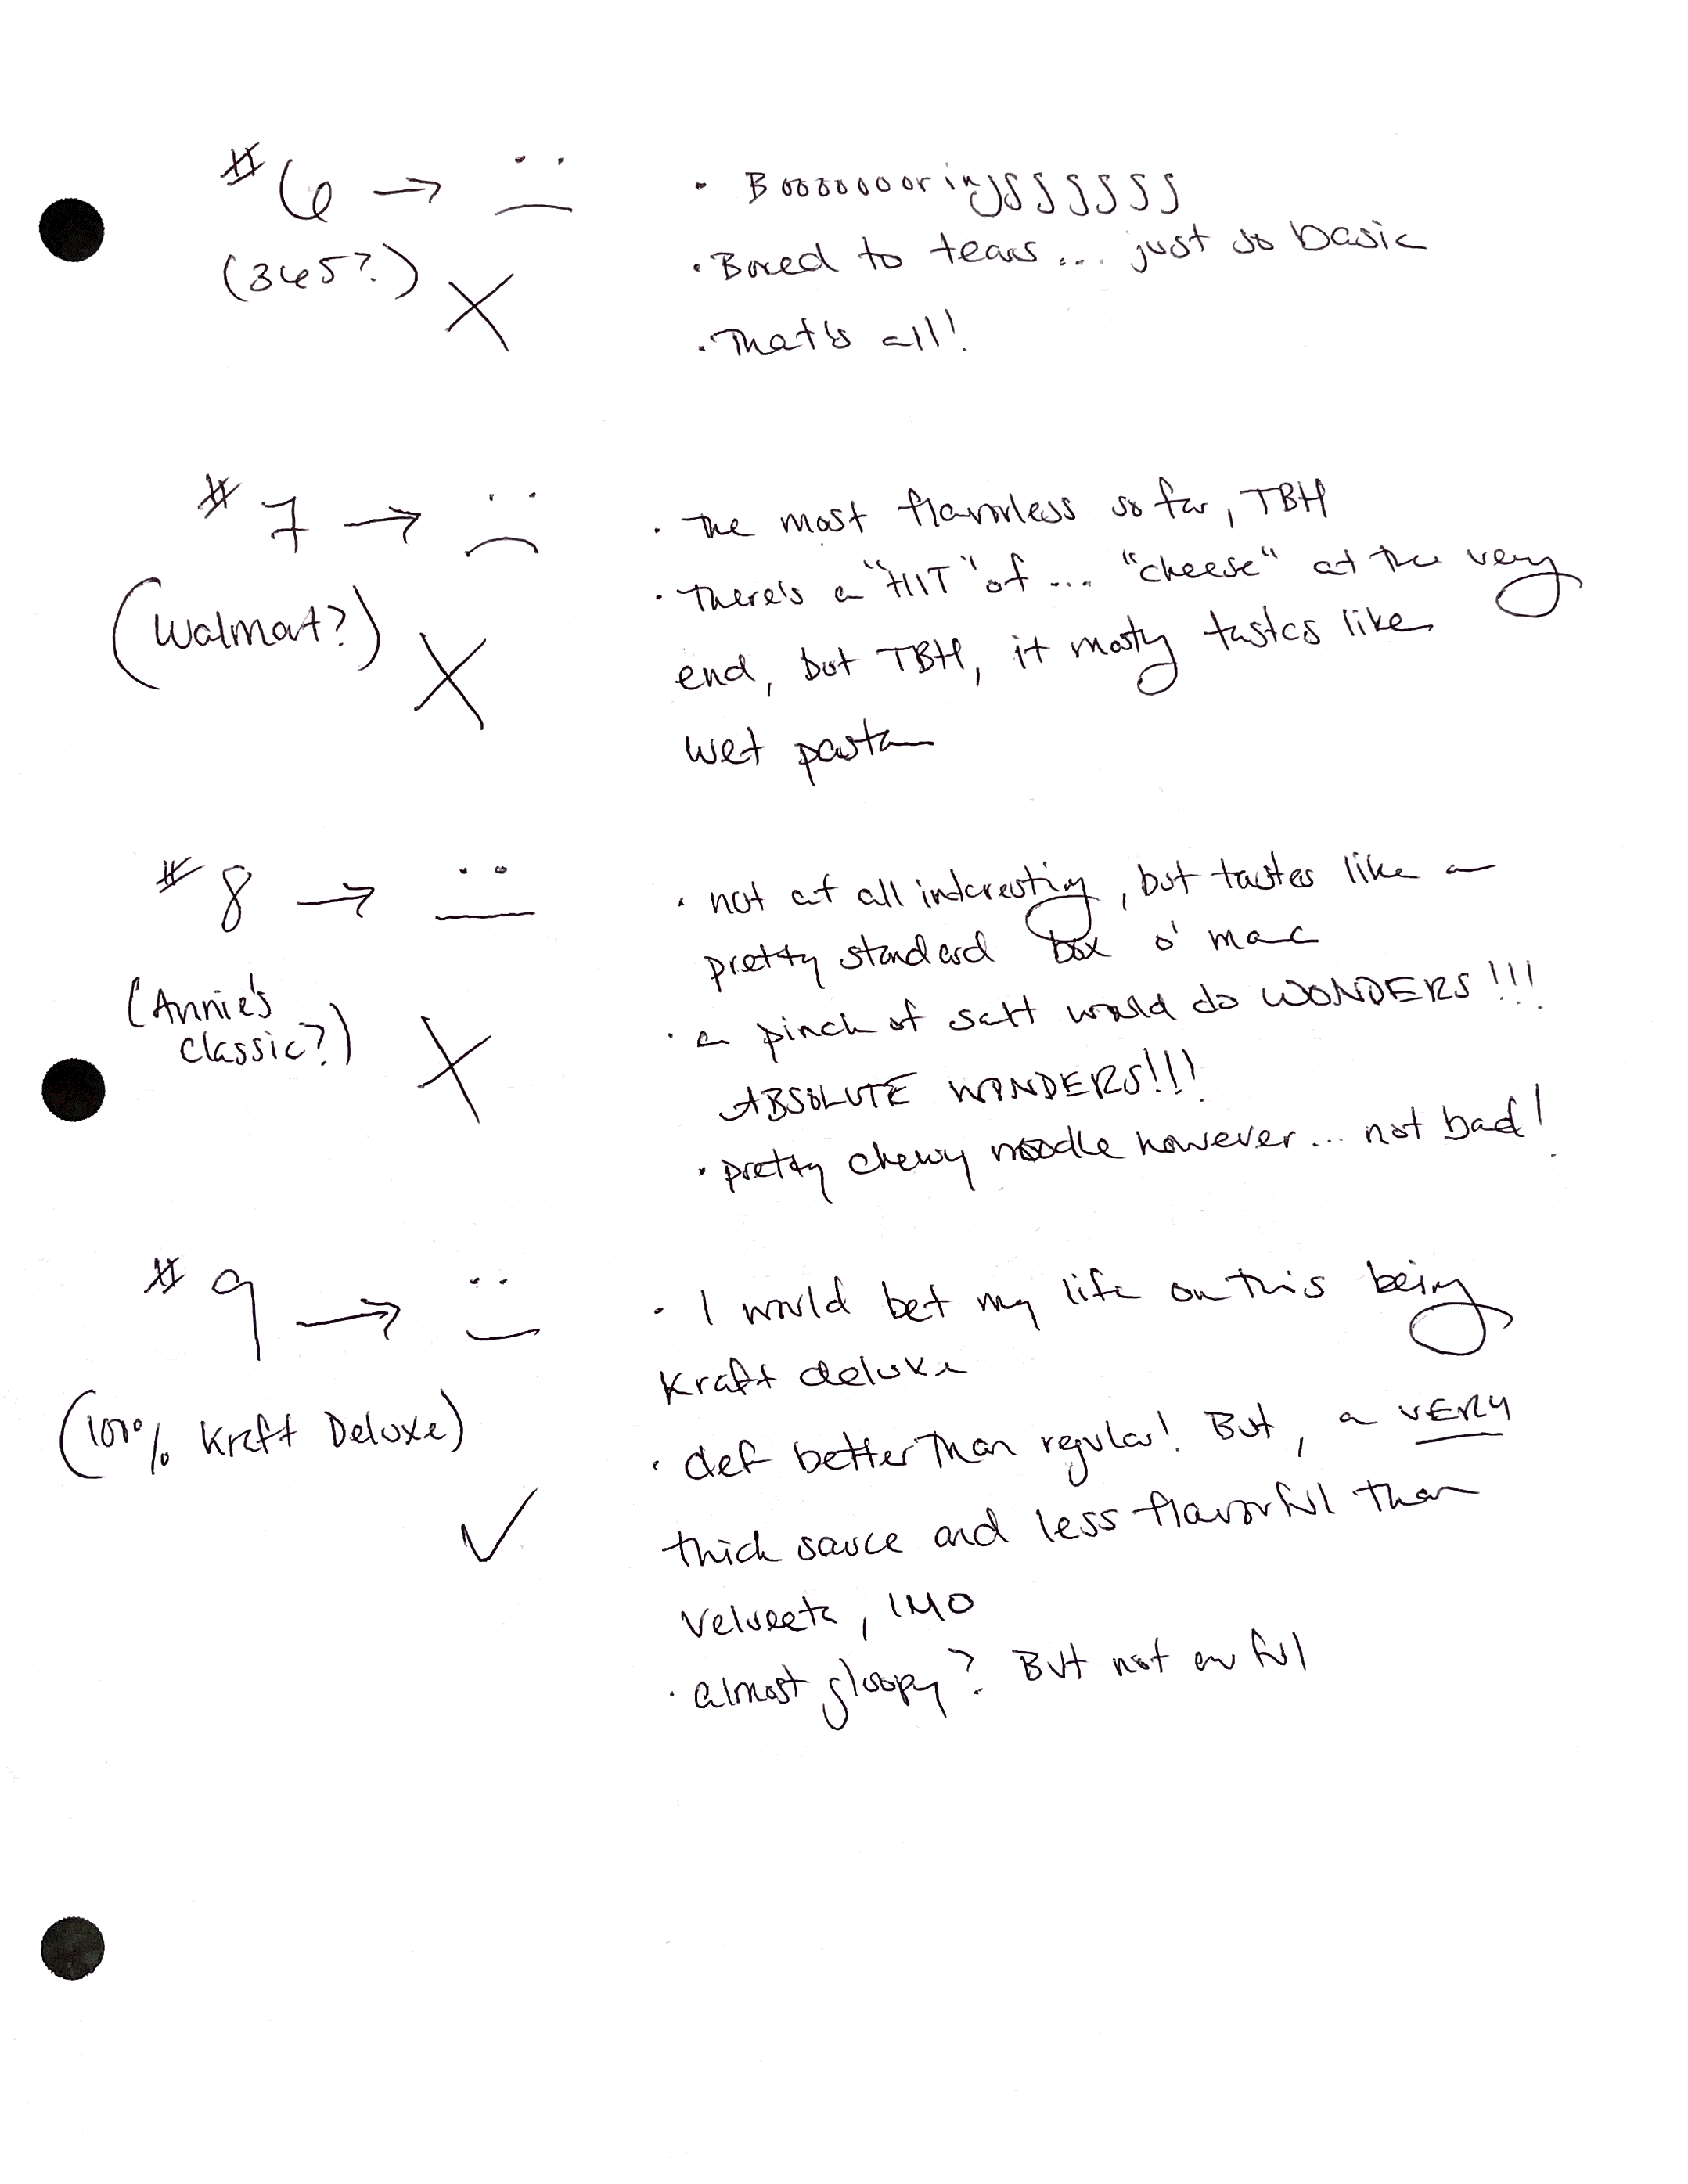 More of the author&#x27;s handwritten notes on a piece of paper